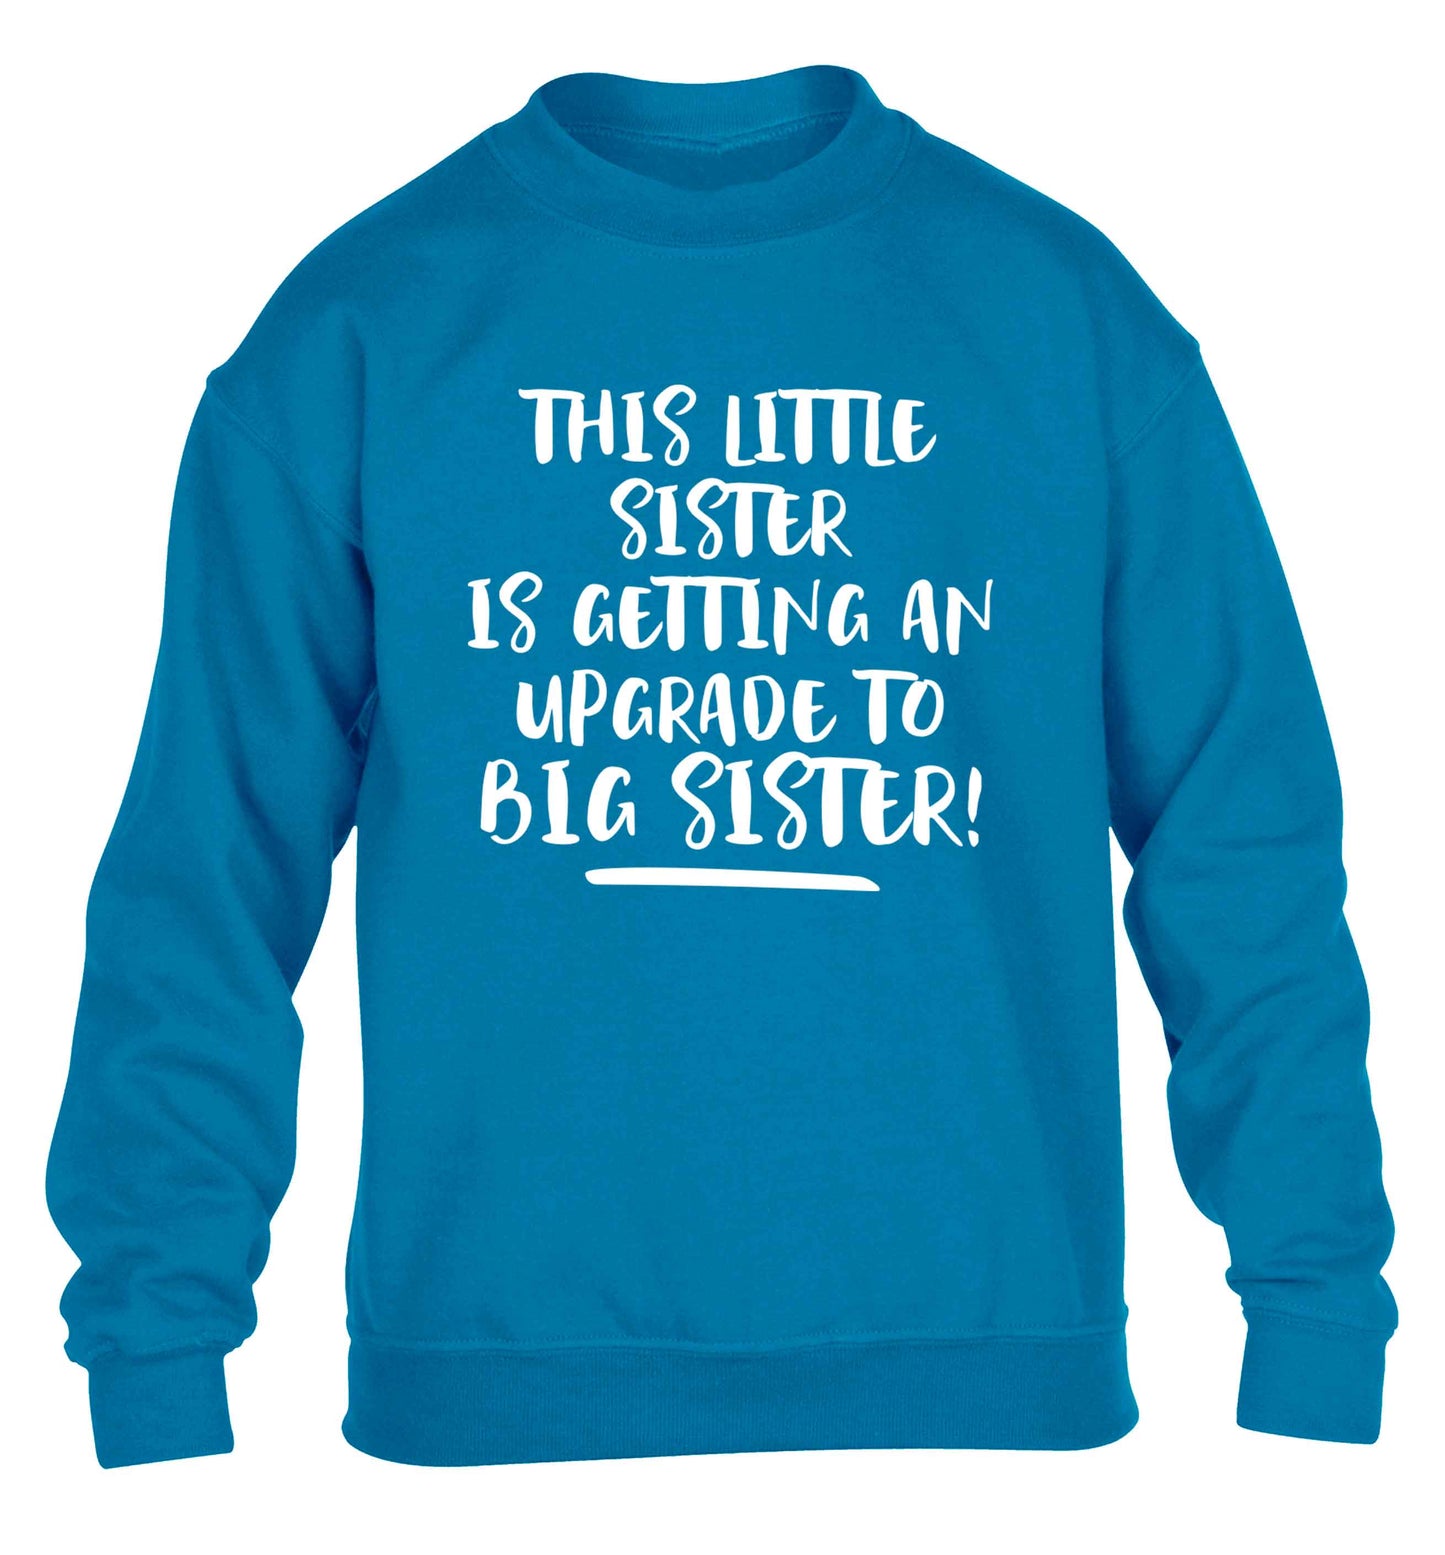 This little sister is getting an upgrade to big sister! children's blue sweater 12-13 Years